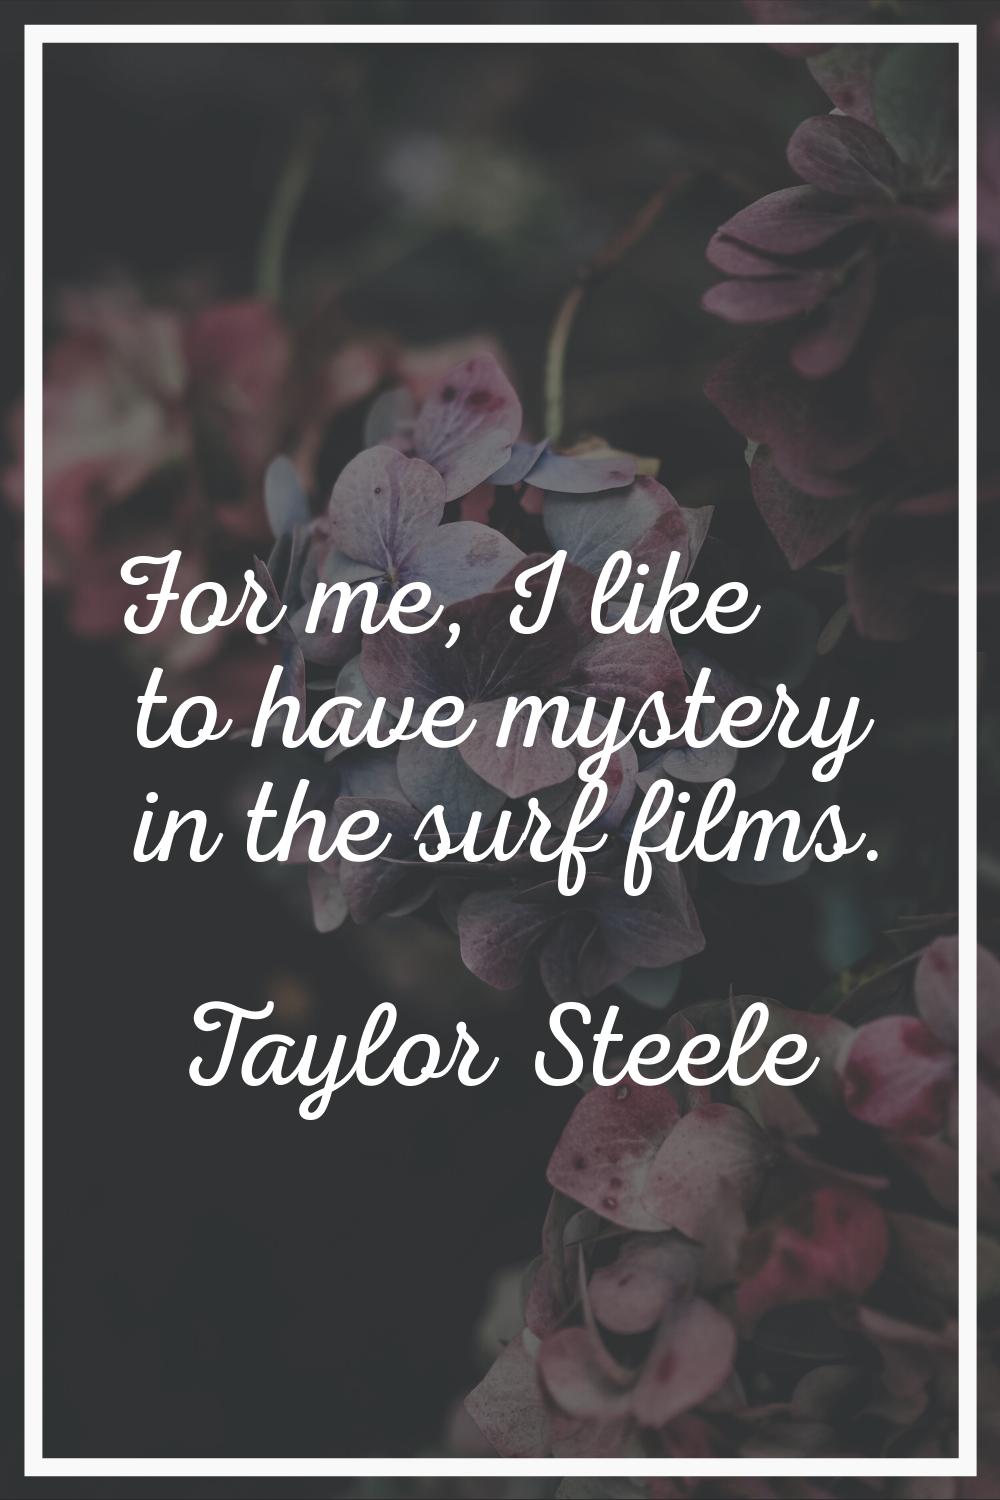 For me, I like to have mystery in the surf films.